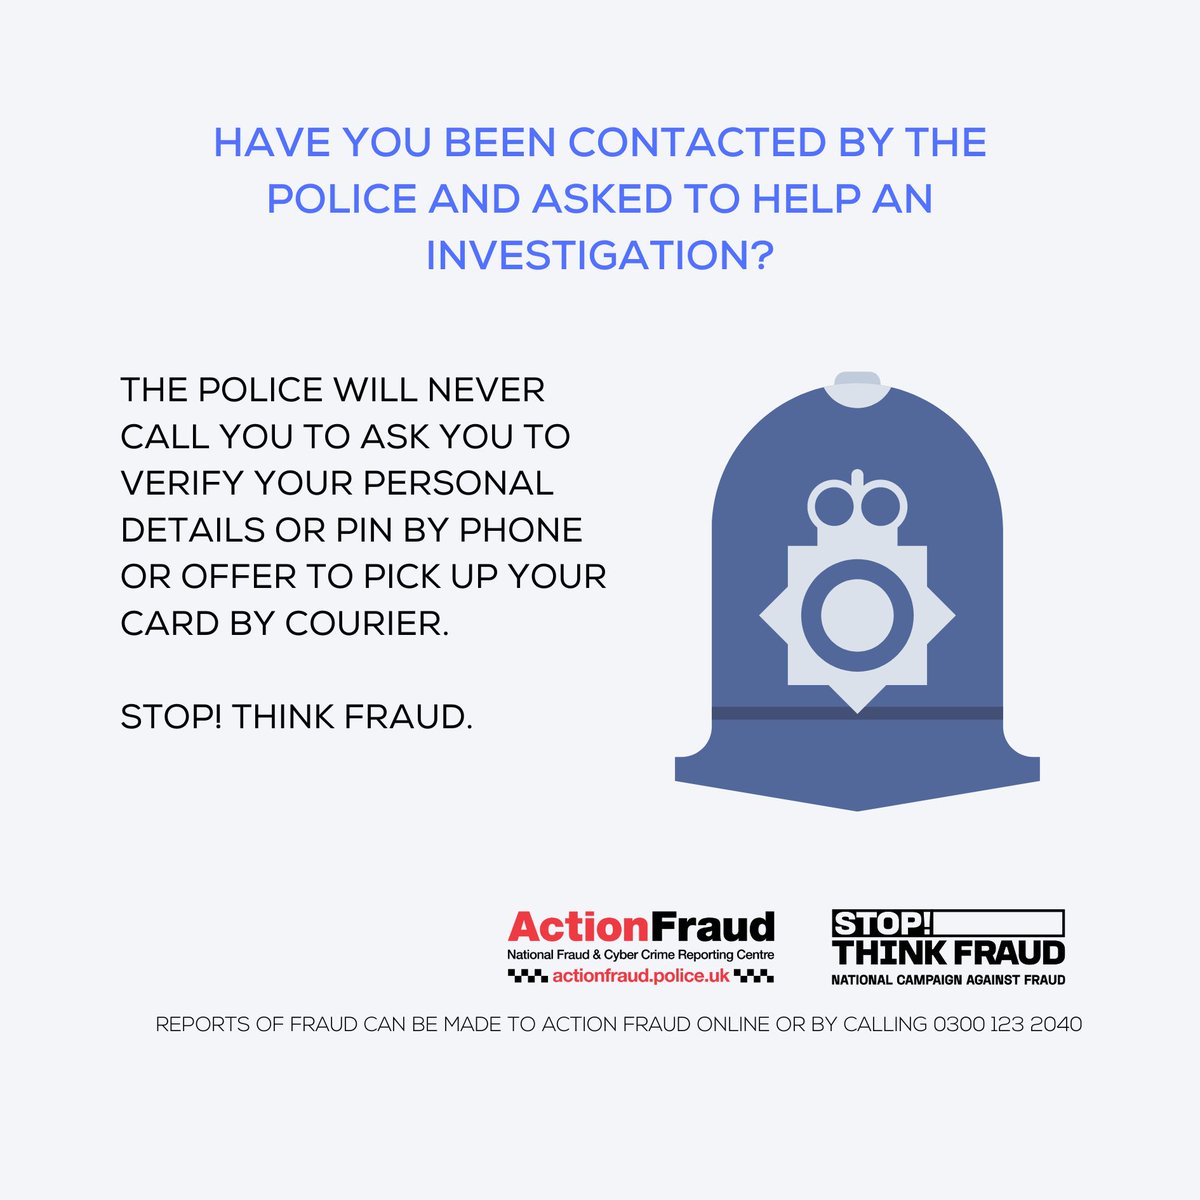 Criminals posing as police officers is common with courier fraud. They may try to convince you that you are helping an investigation by handing over money or purchasing gold. If this happens, hang up and dial 999. You can also make a fraud report at orlo.uk/action-fraud_W…